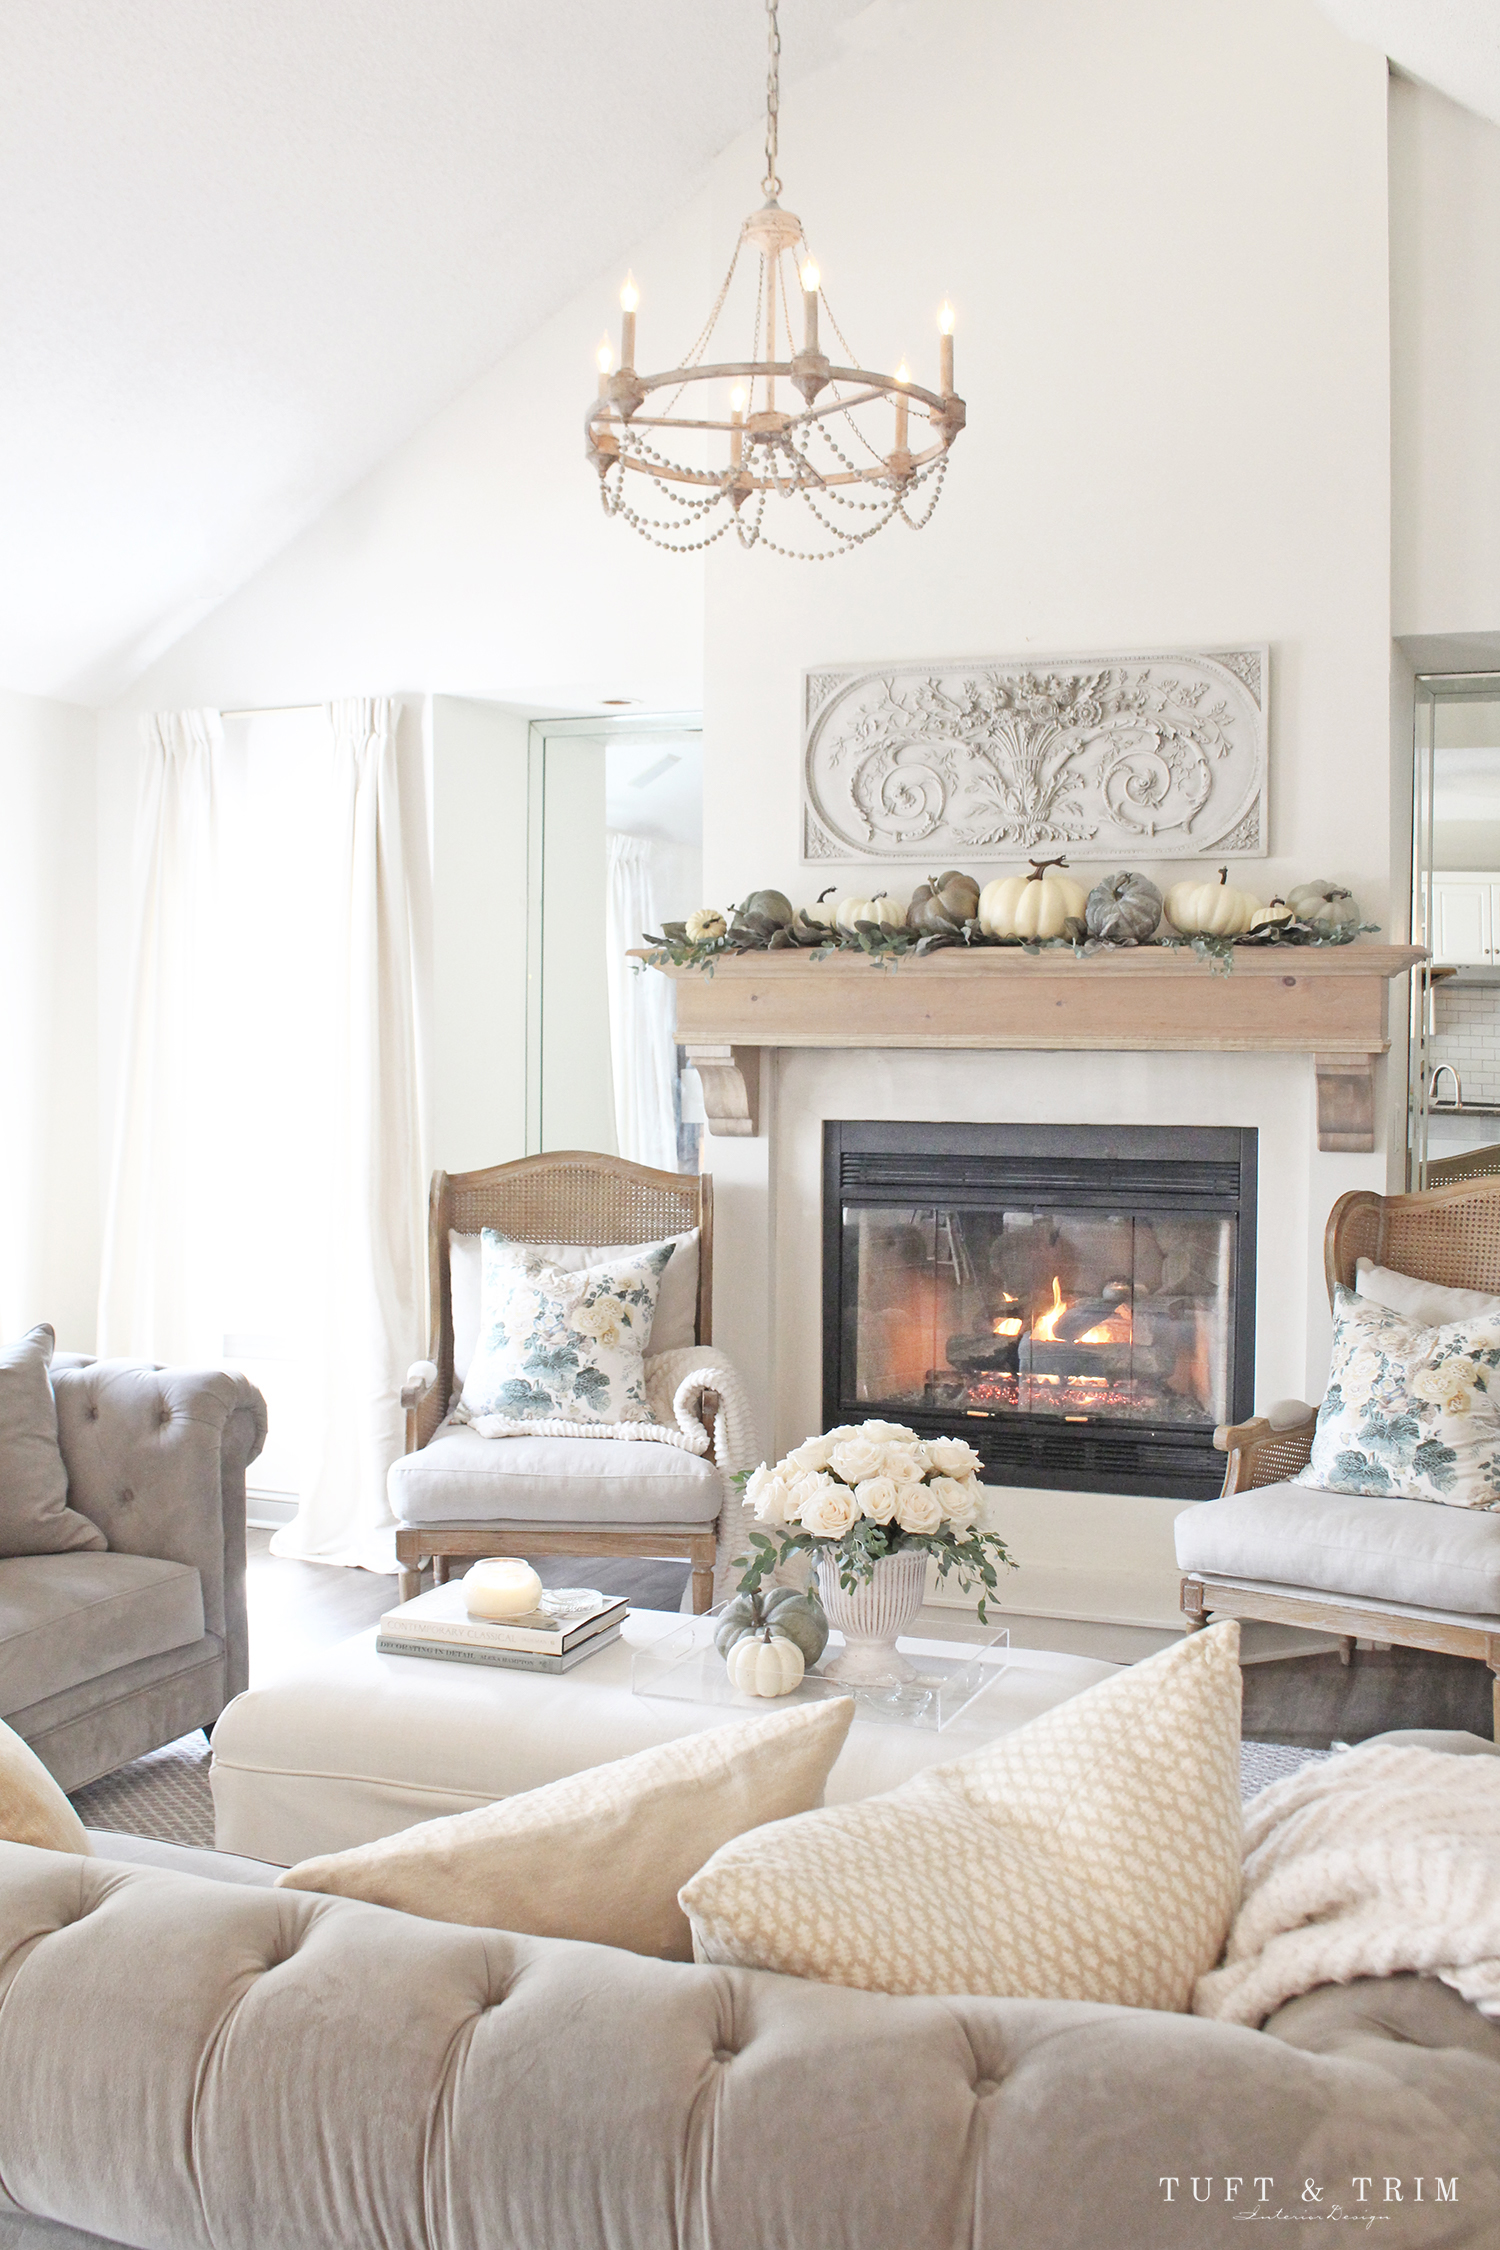 Styling Neutral Fall Decor in Your Home - Micheala Diane Designs